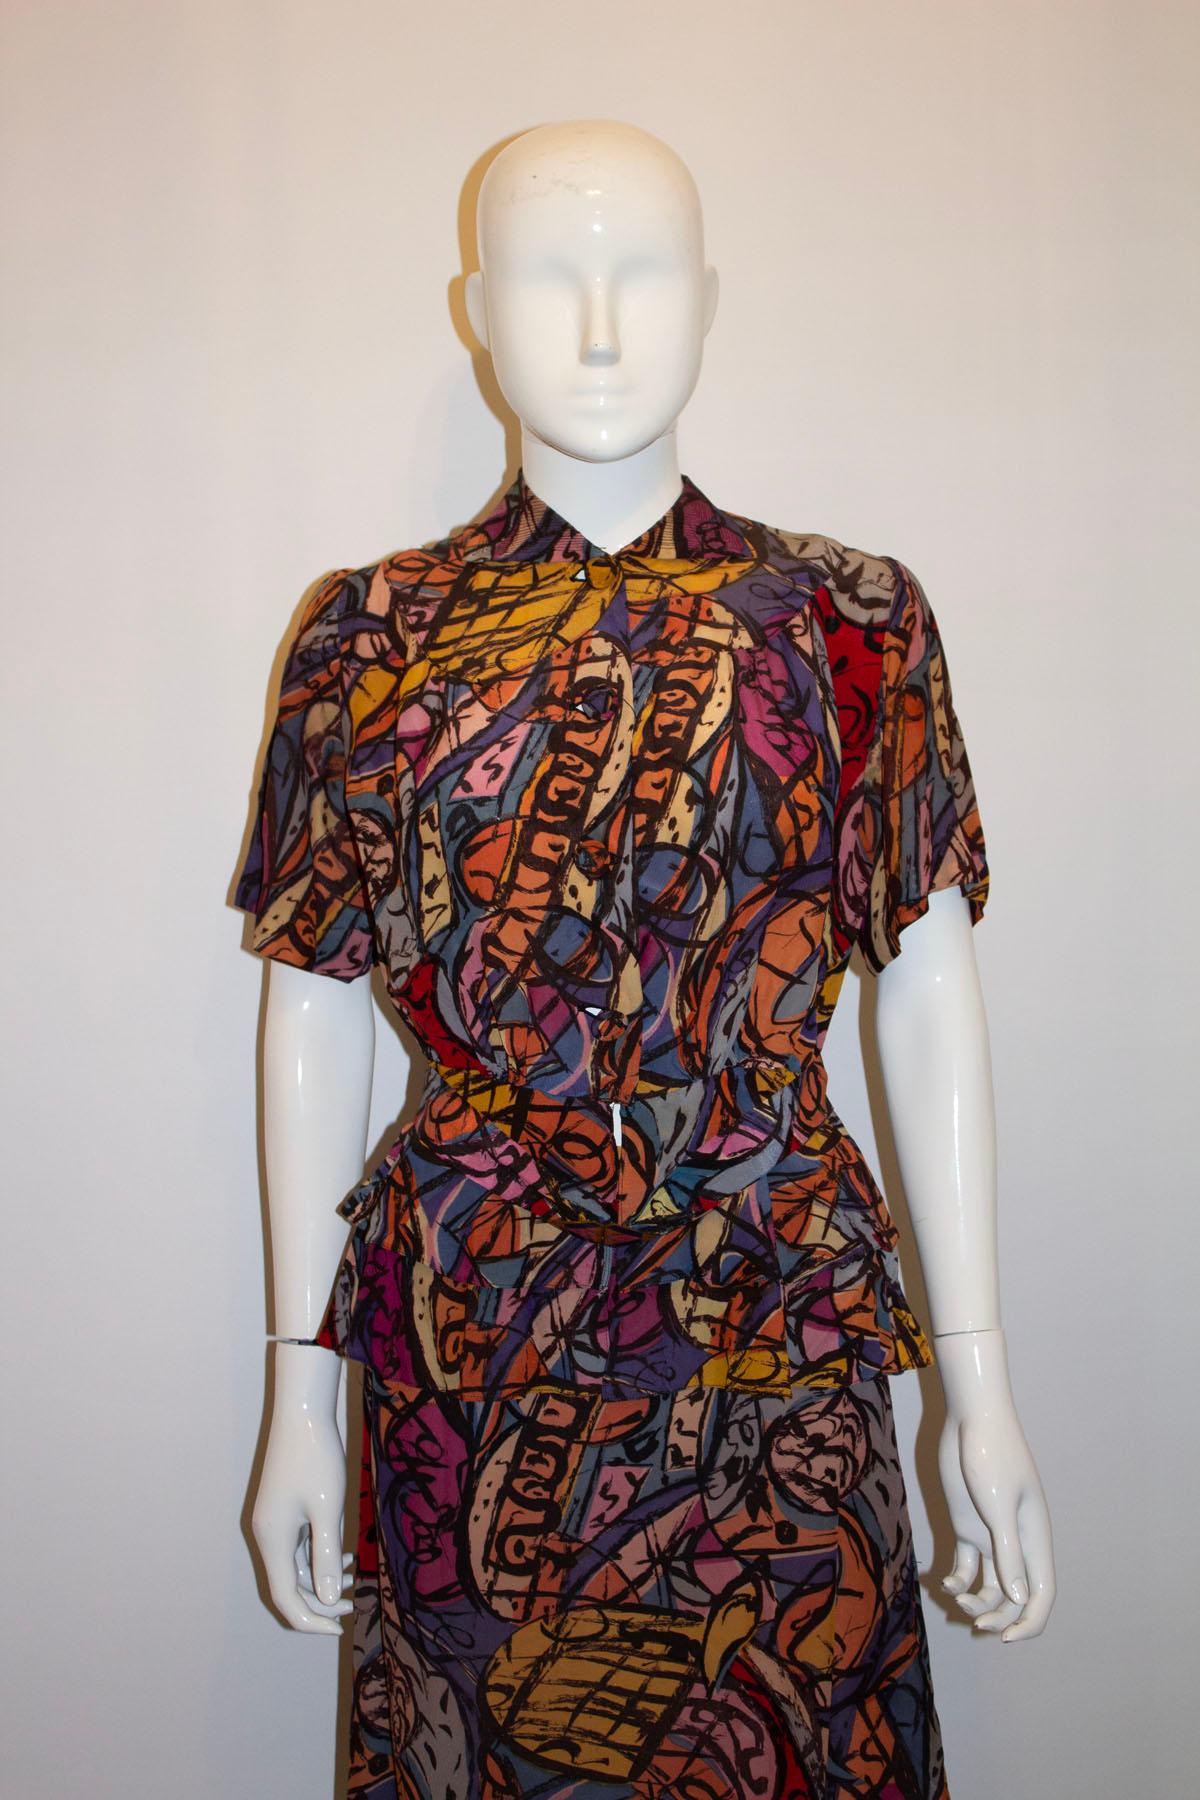 A headturning vintage skirt suit dating from the 1940s. The suit is in a wonderful print of purple, pink and orange. The skirt is A line, and the jacket has fabric button opening, yoke and a double peplum. The fabric belt has an attractive enamel